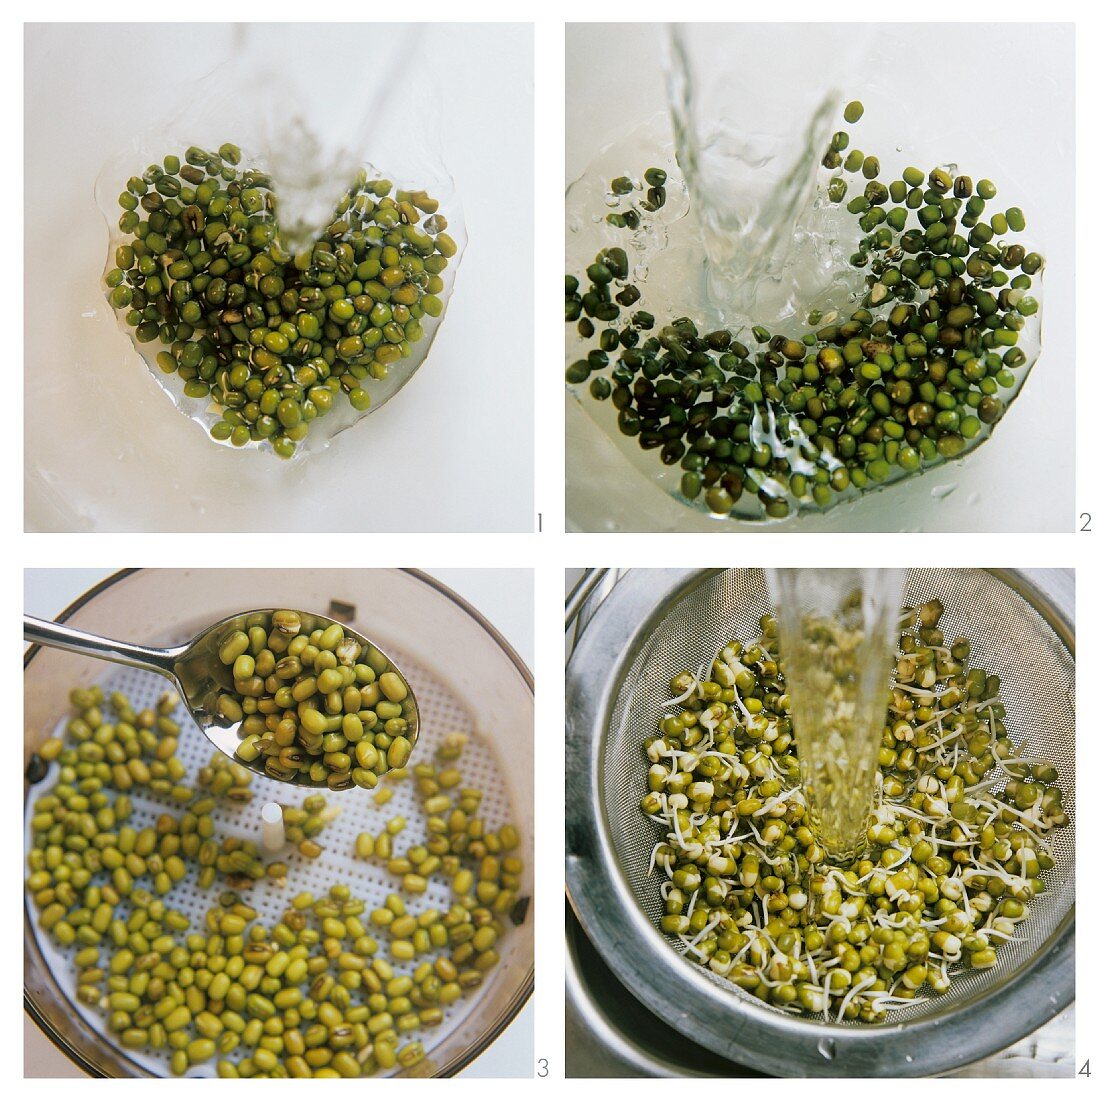 Sprouting seeds (soaking seeds, swelling, rinsing)